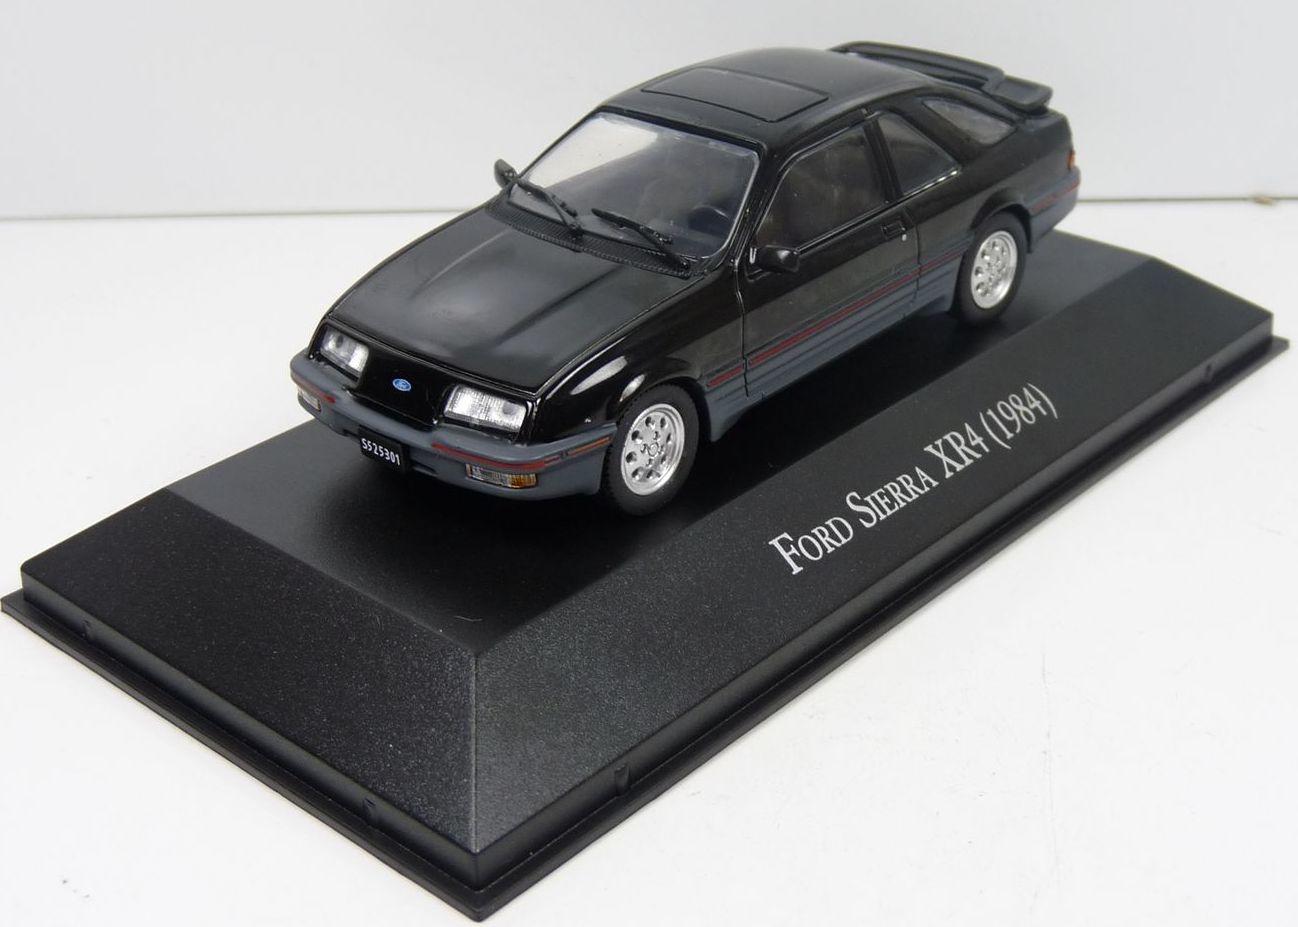 Ford Sierra XR4 1984 in black 1:43 scale model, car of the 80/90s collections